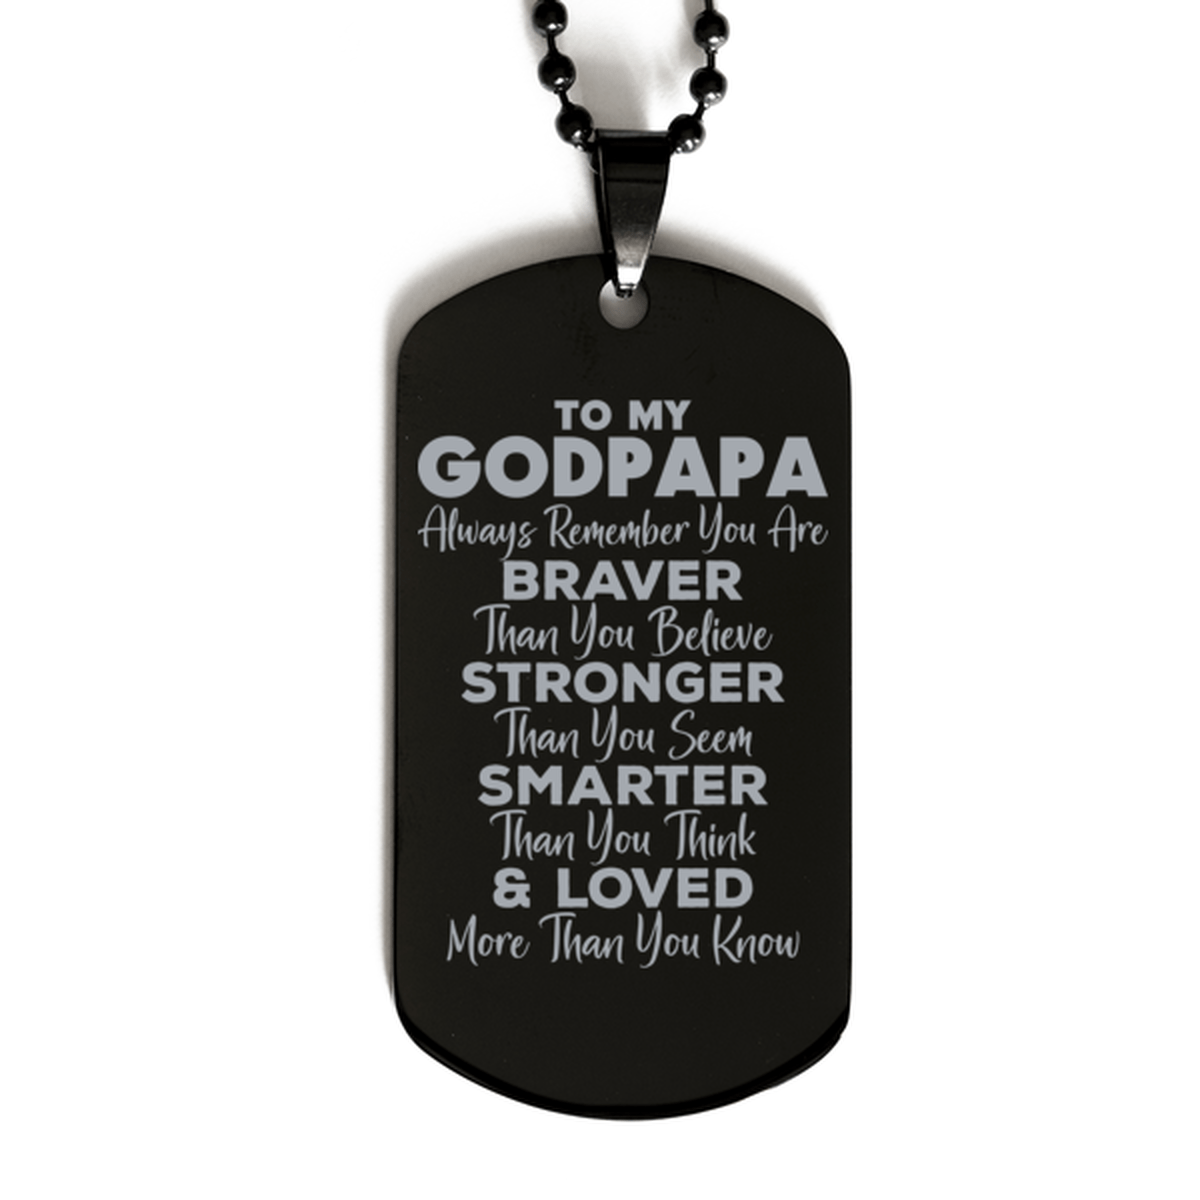 Motivational Godpapa Black Dog Tag Necklace, Godpapa Always Remember You Are Braver Than You Believe, Best Birthday Gifts for Godpapa